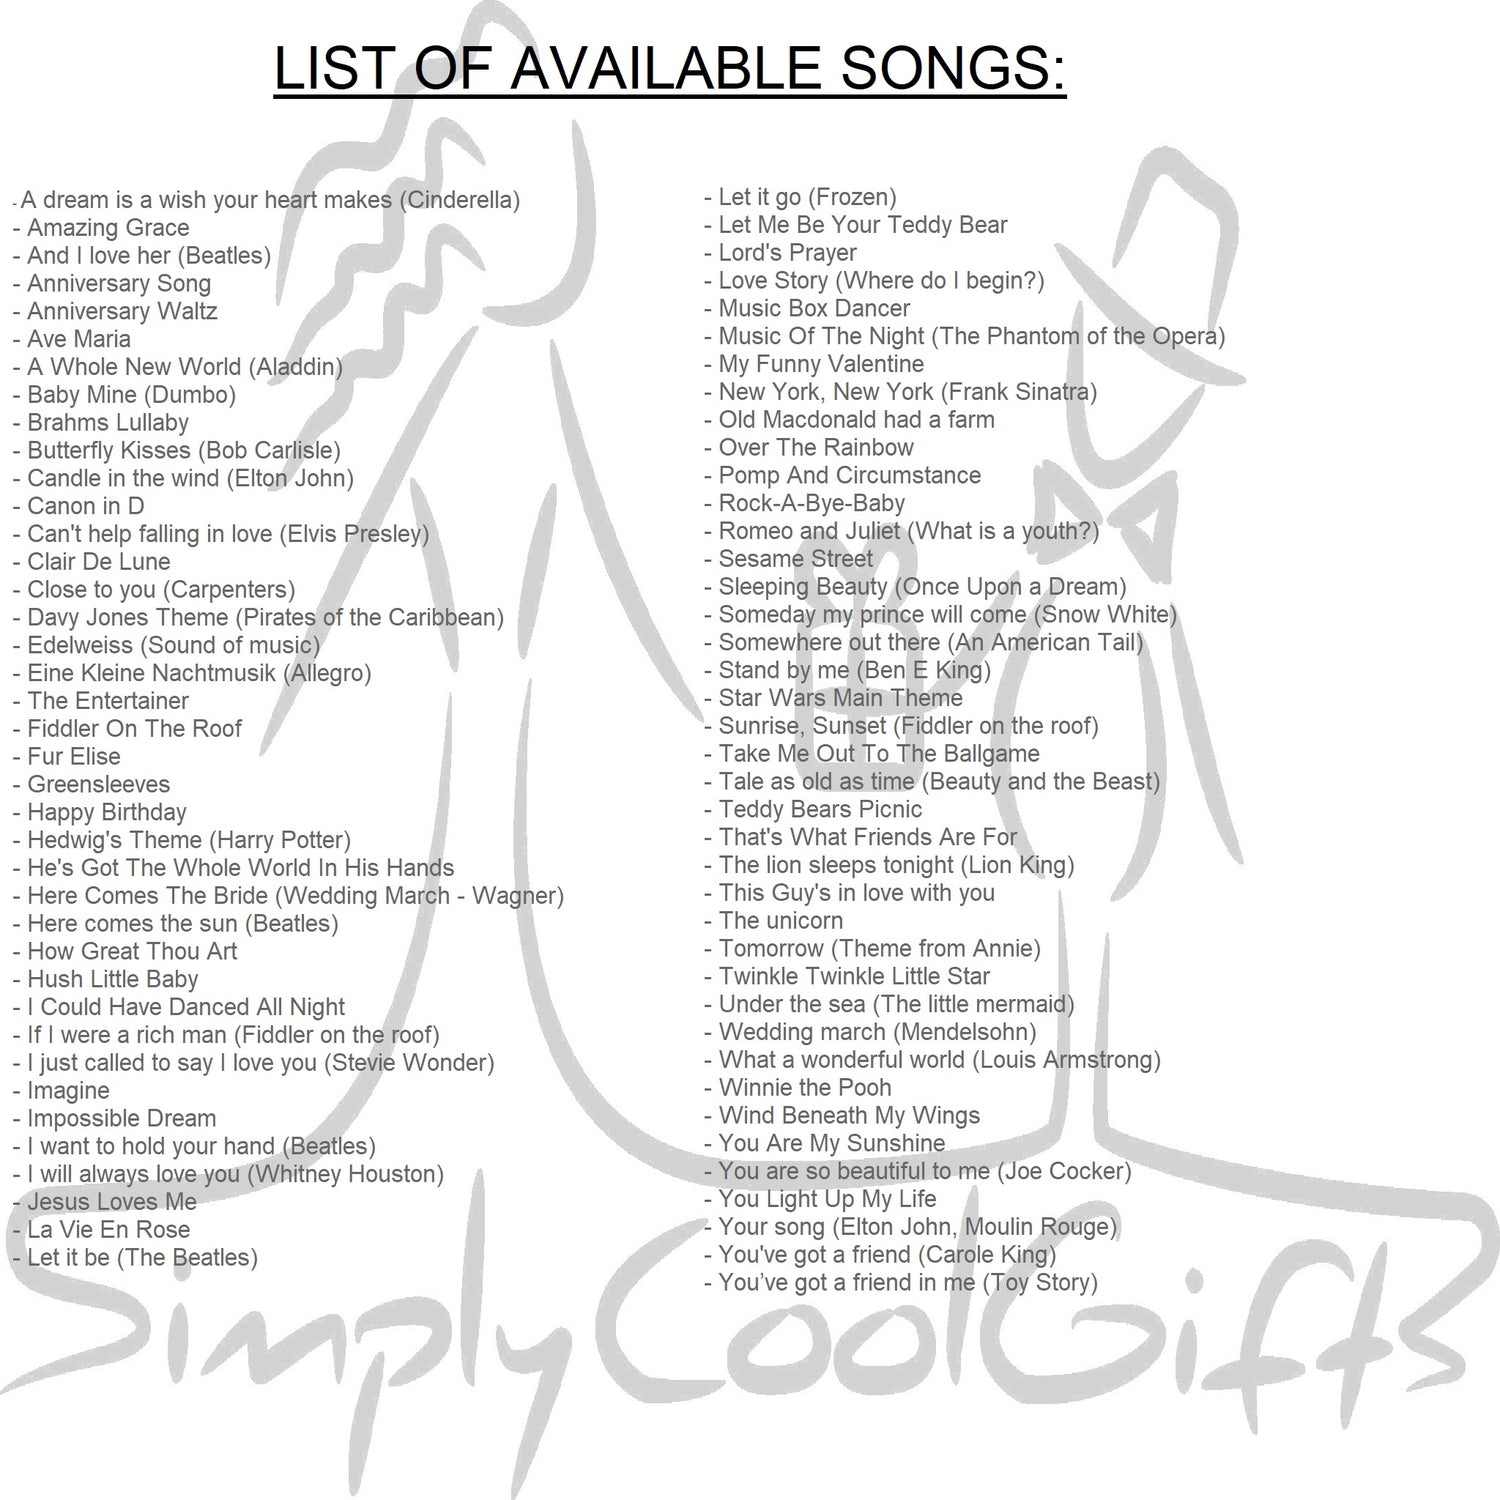 You are my sunshine and other songs listed here at the available list of songs